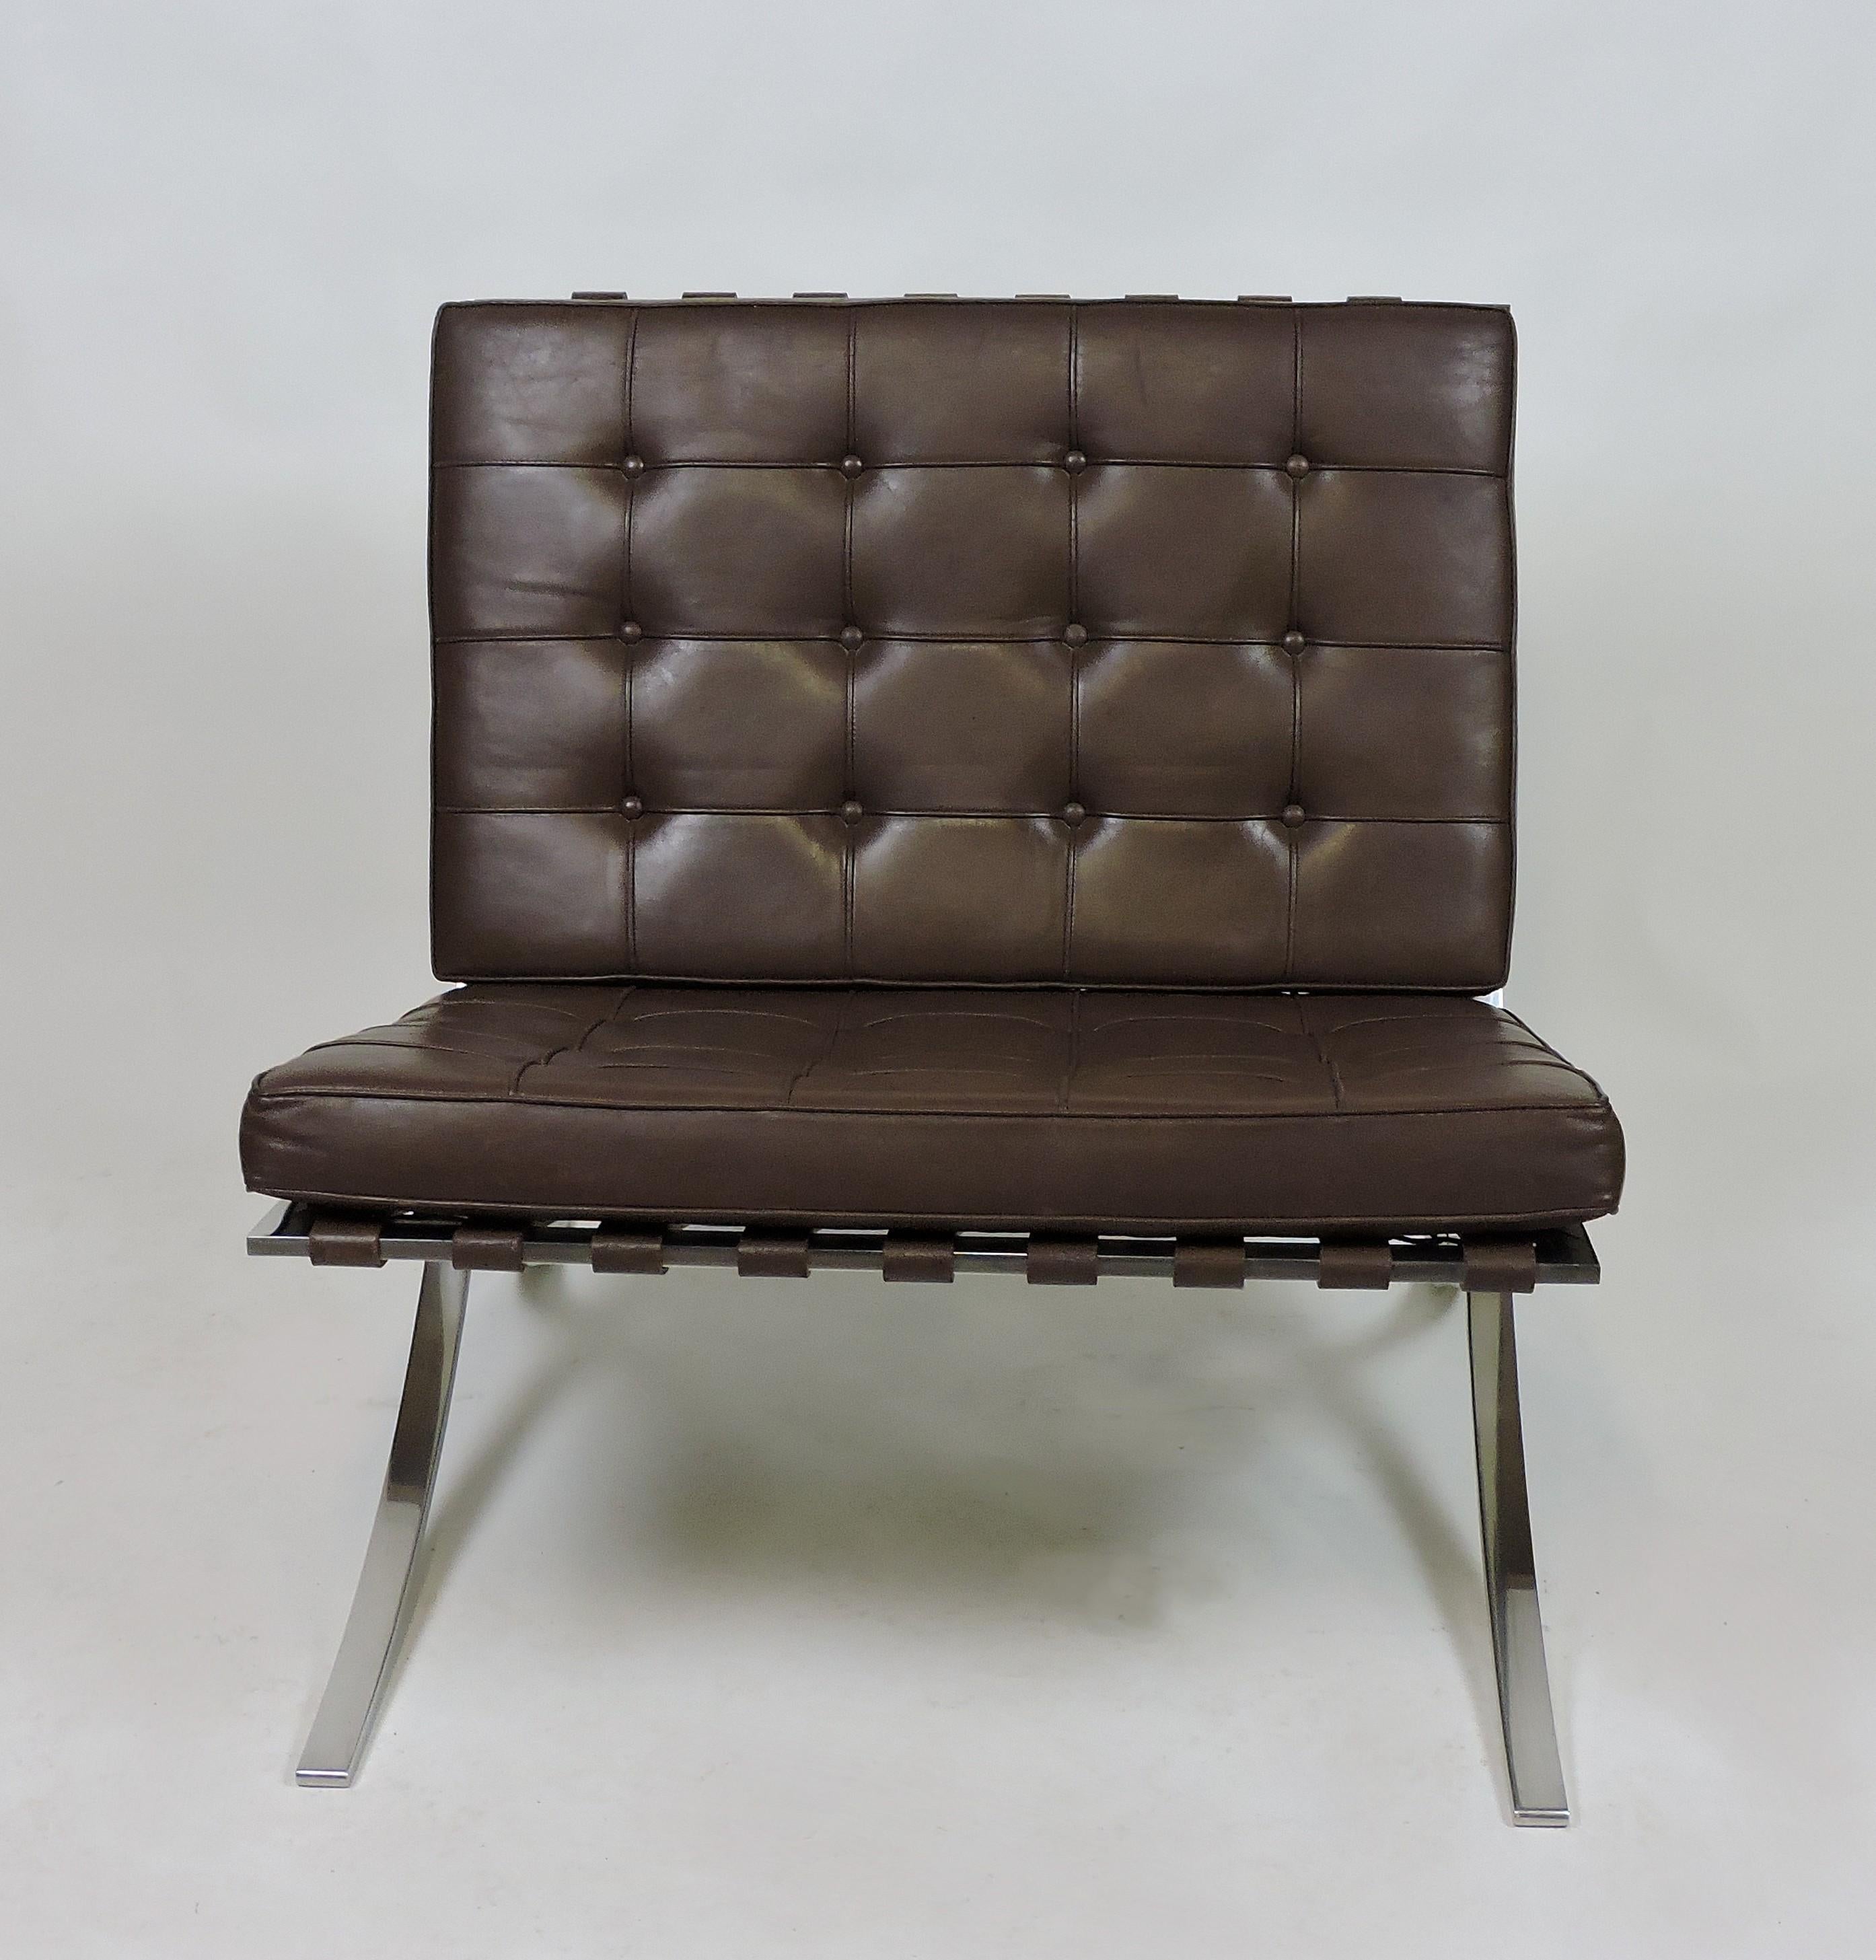 Classic and iconic Barcelona chair that was originally designed by Mies van der Rohe in 1929.
This elegant chair has a gracefully curved frame and is made of the more expensive polished stainless steel (not chrome-plated steel), with dark brown